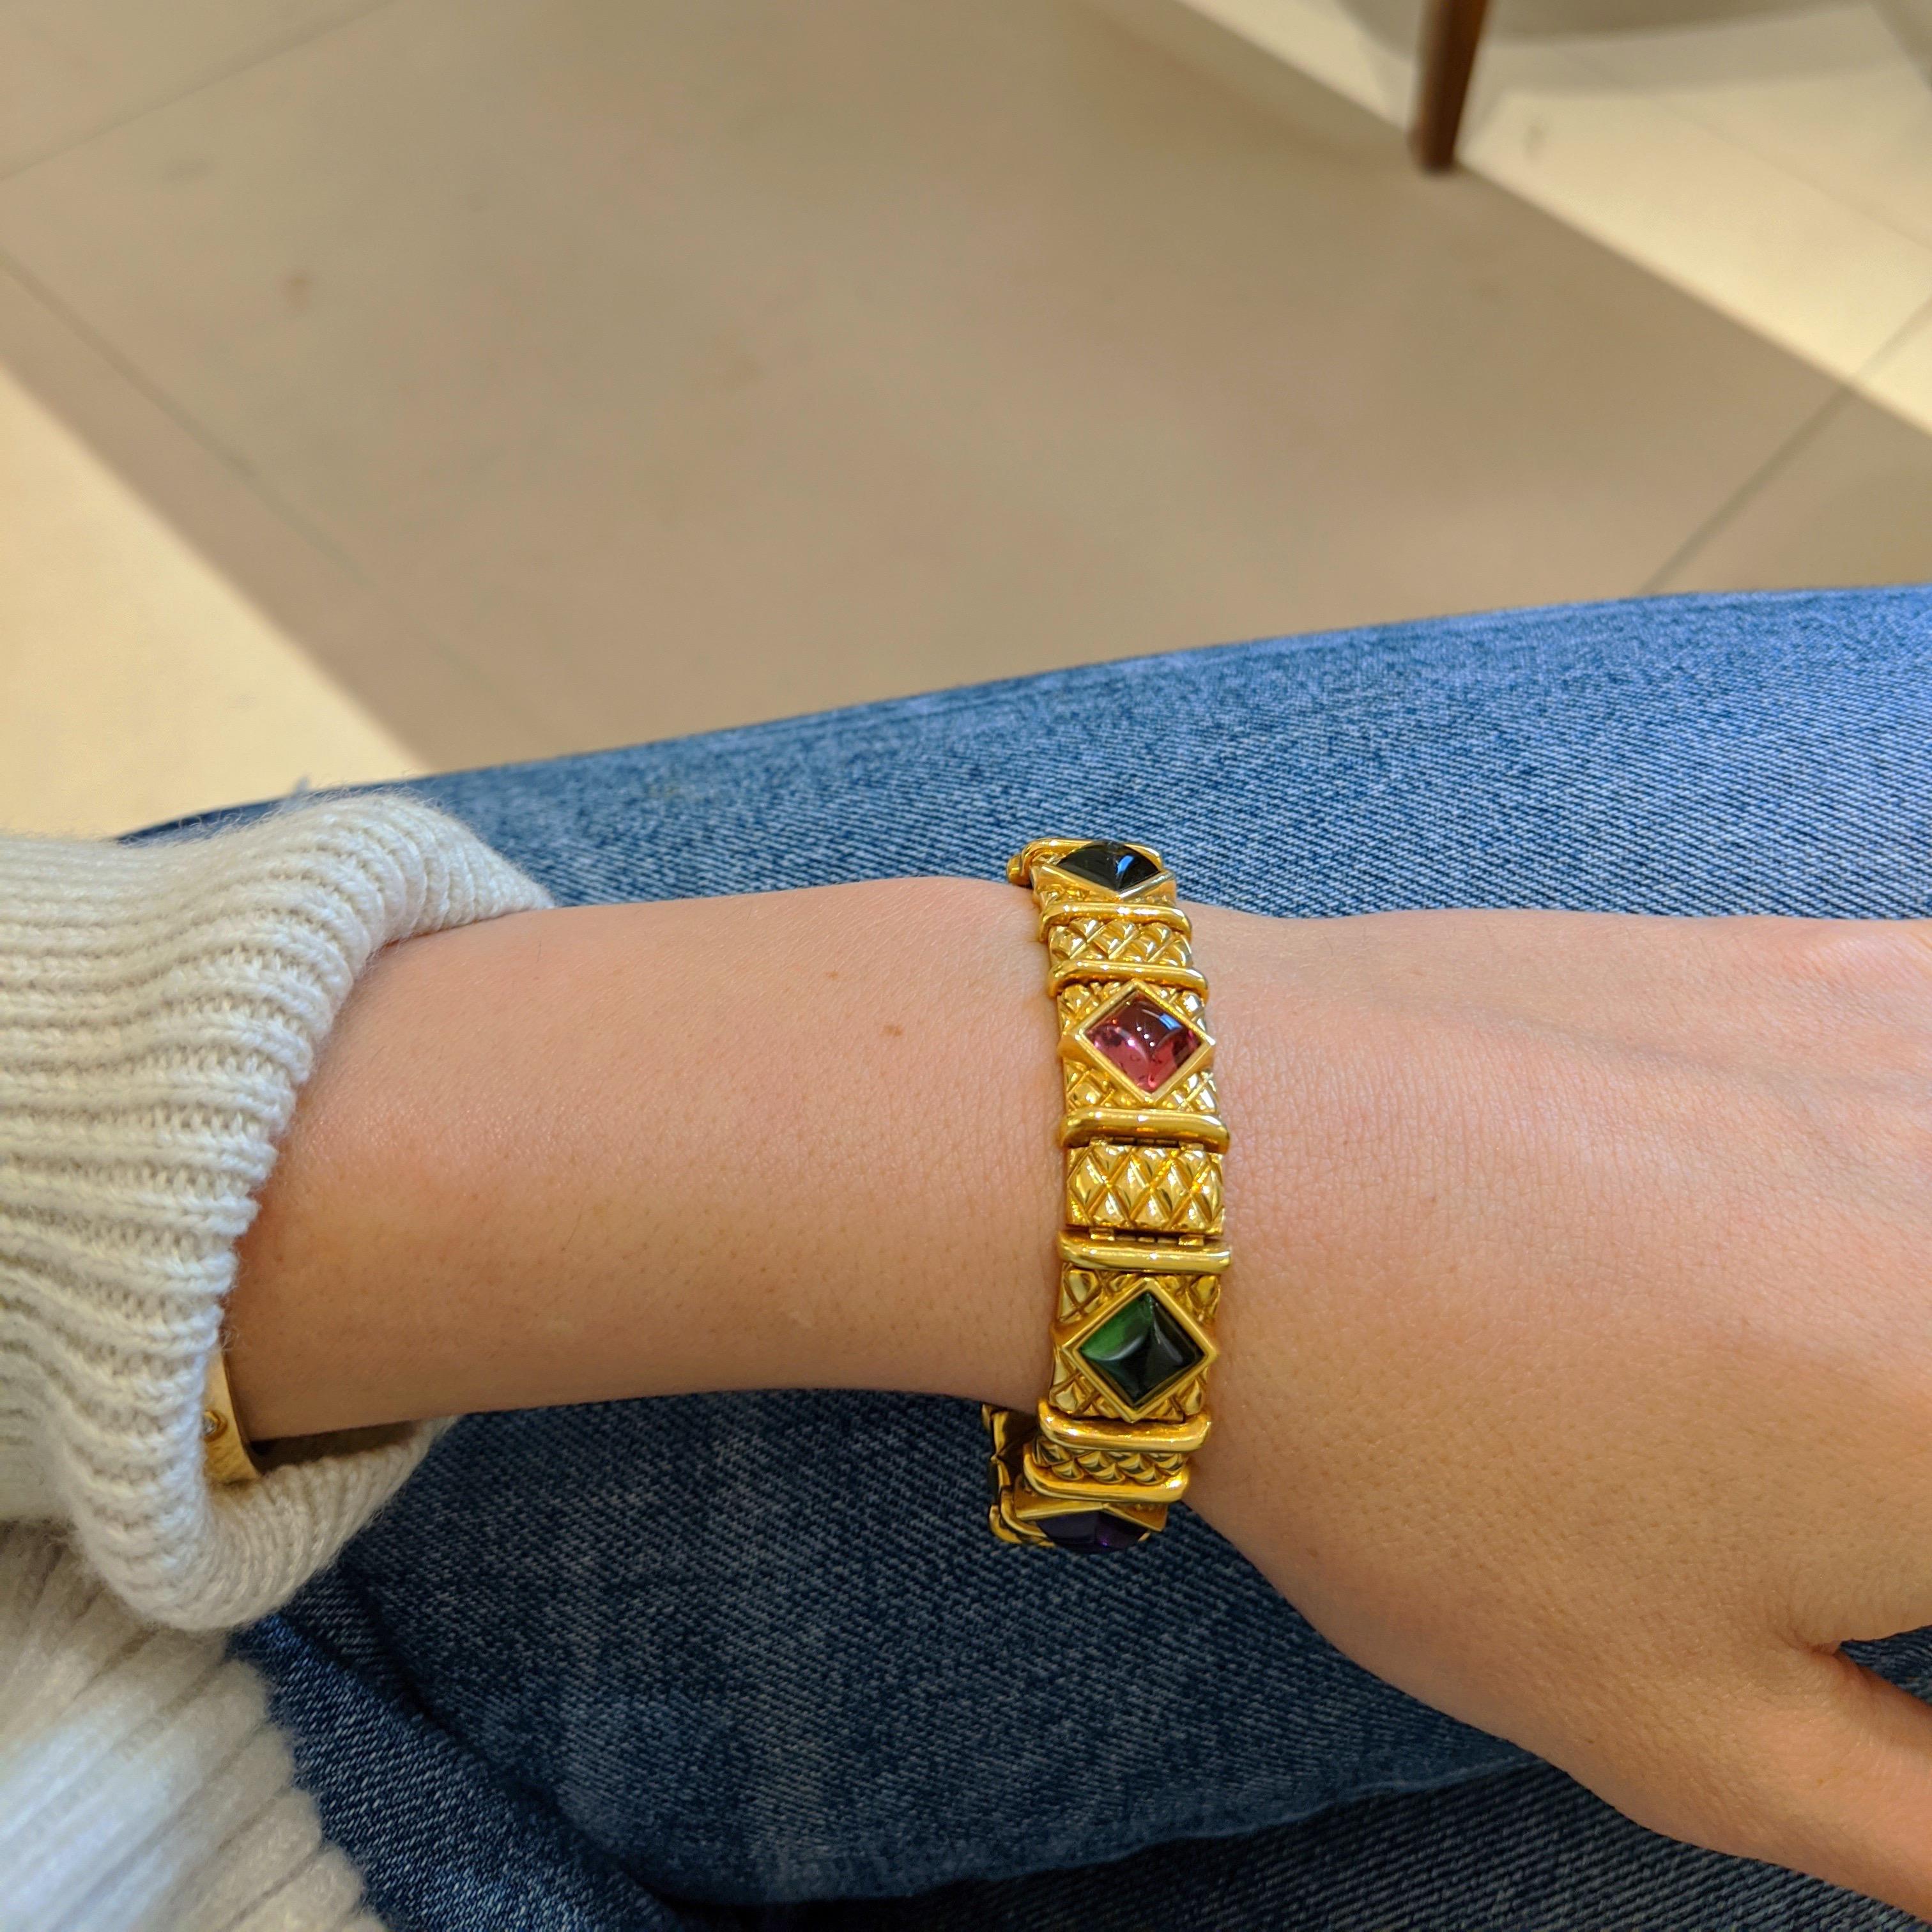 This bracelet is designed with 15 yellow gold links each with a quilted diamond pattern. Every other link features diamond shaped cabachon stones of Amethyst, Citrine, Green & Pink Tourmaline that have been bezel set. the bracelet measures 6 1/2